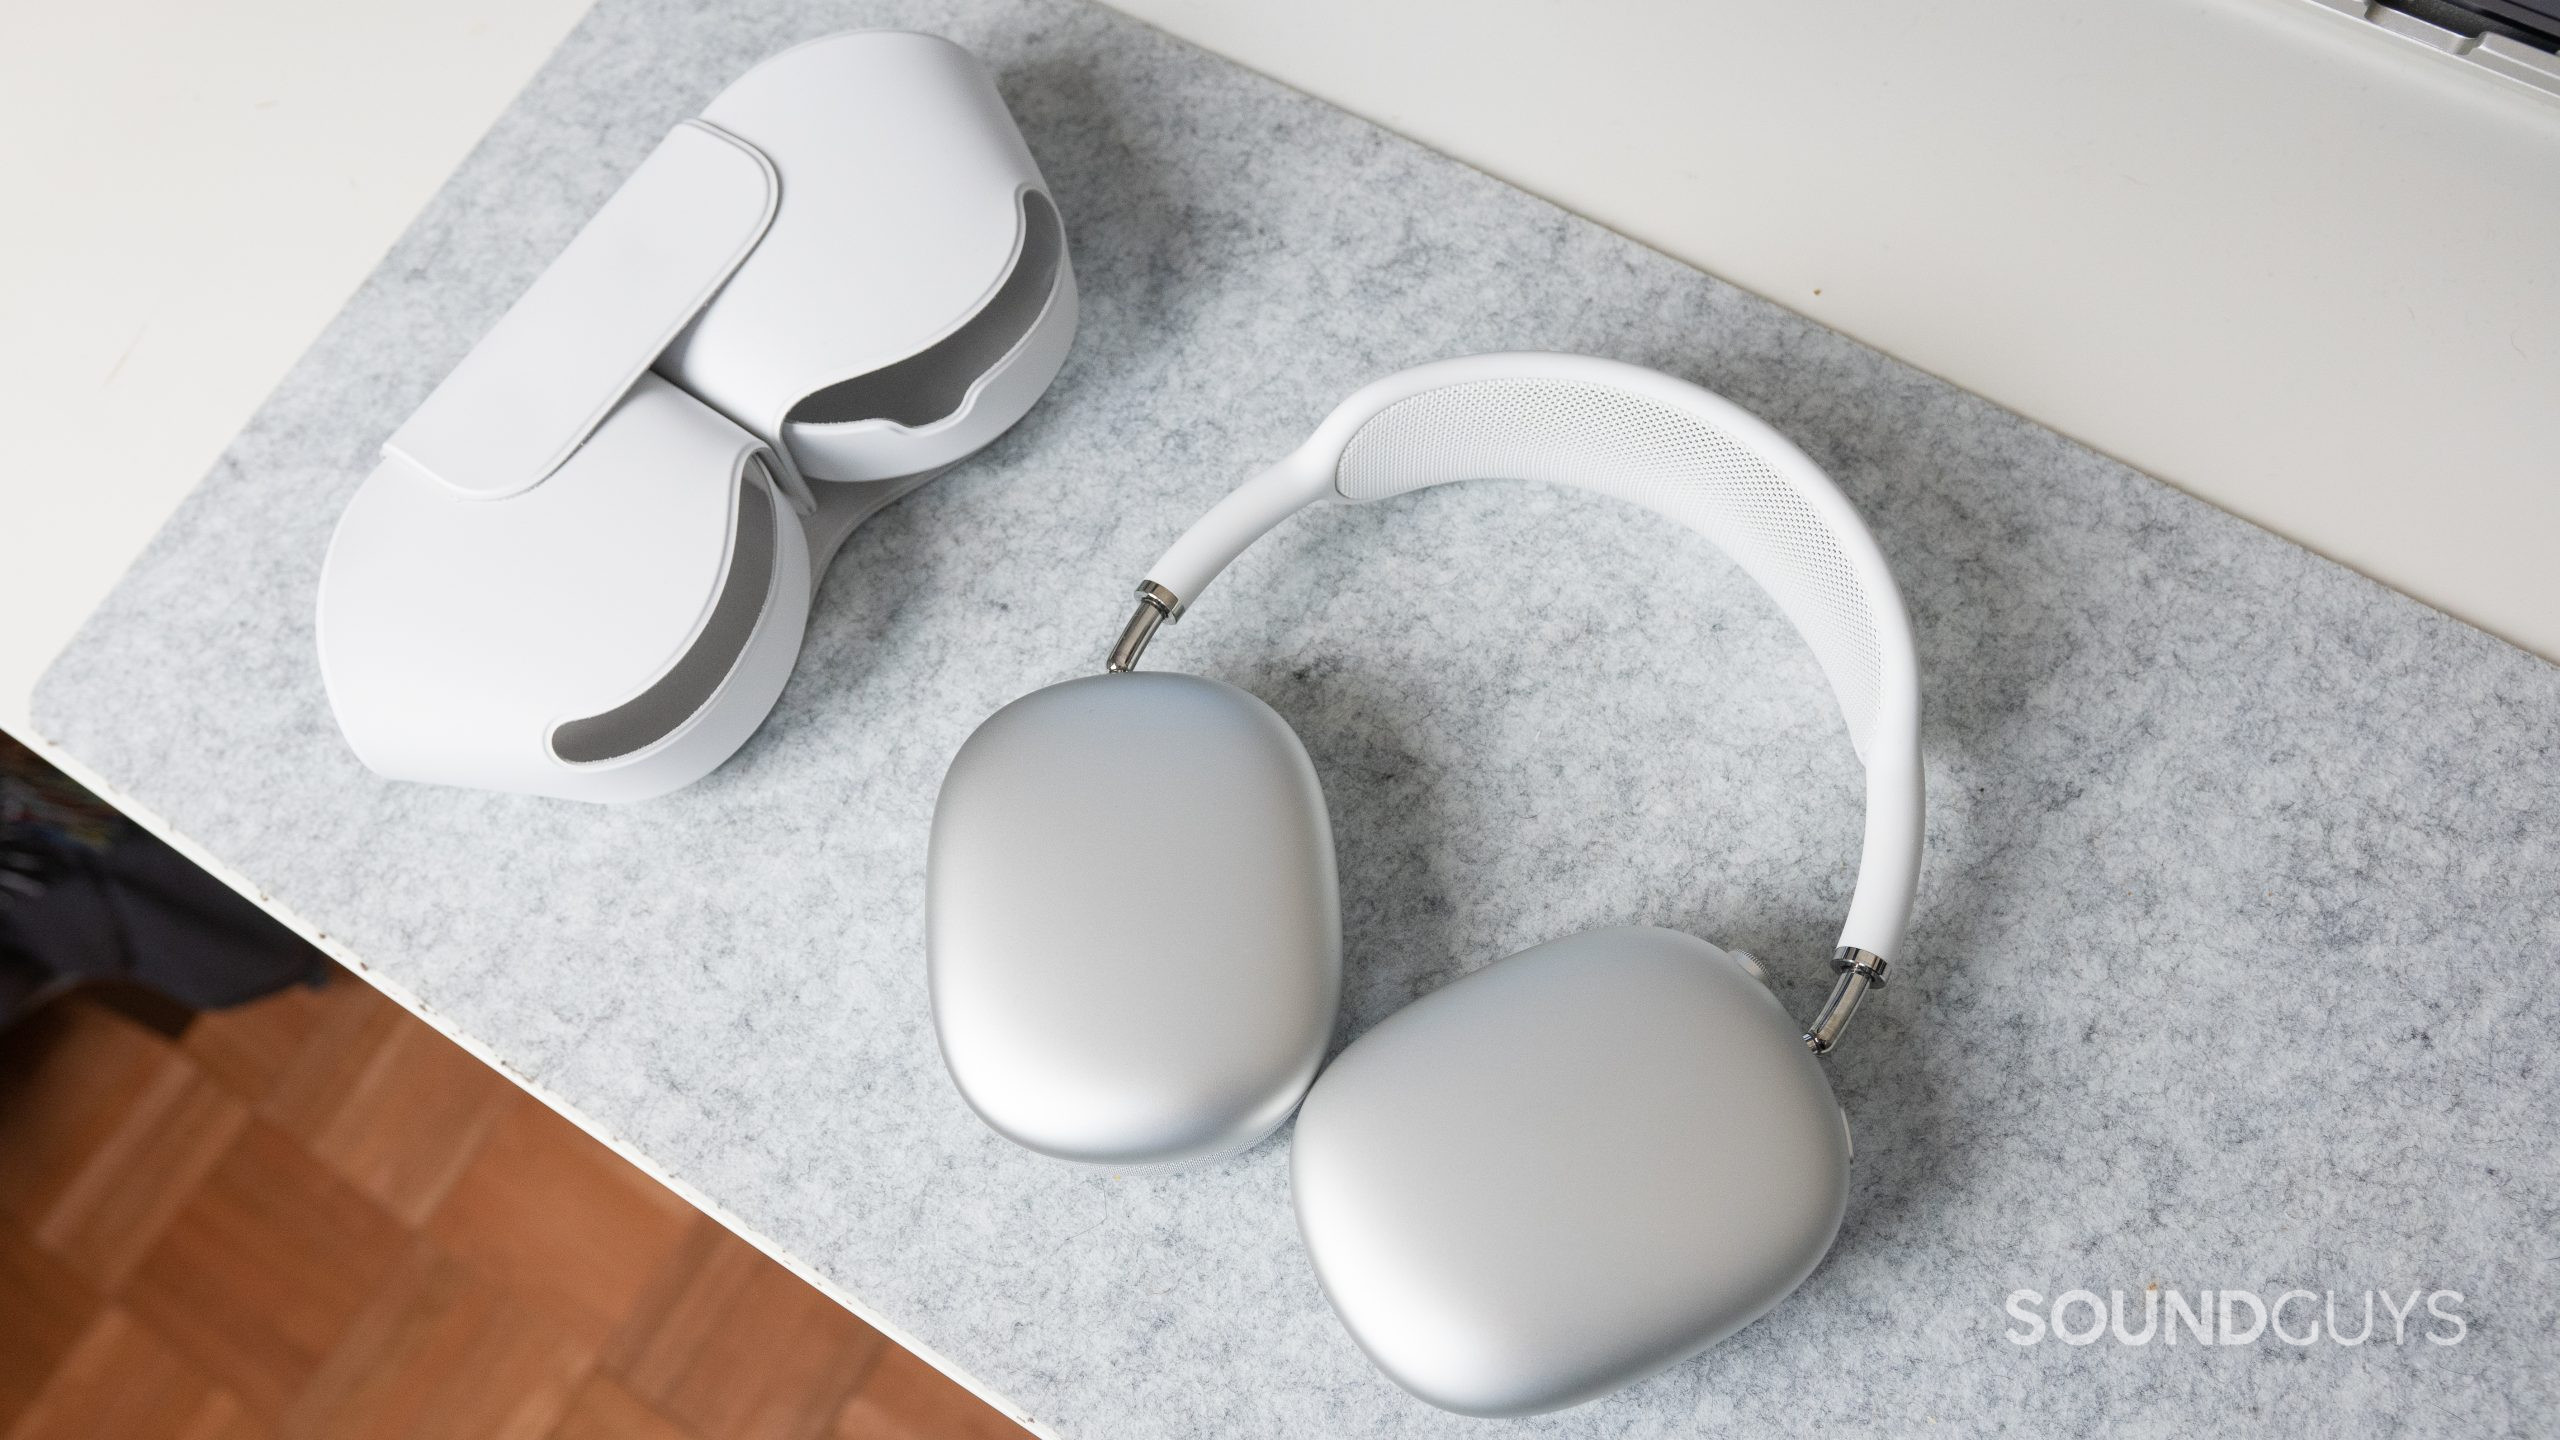 The Apple AirPods Max and its smart case on a white desk.